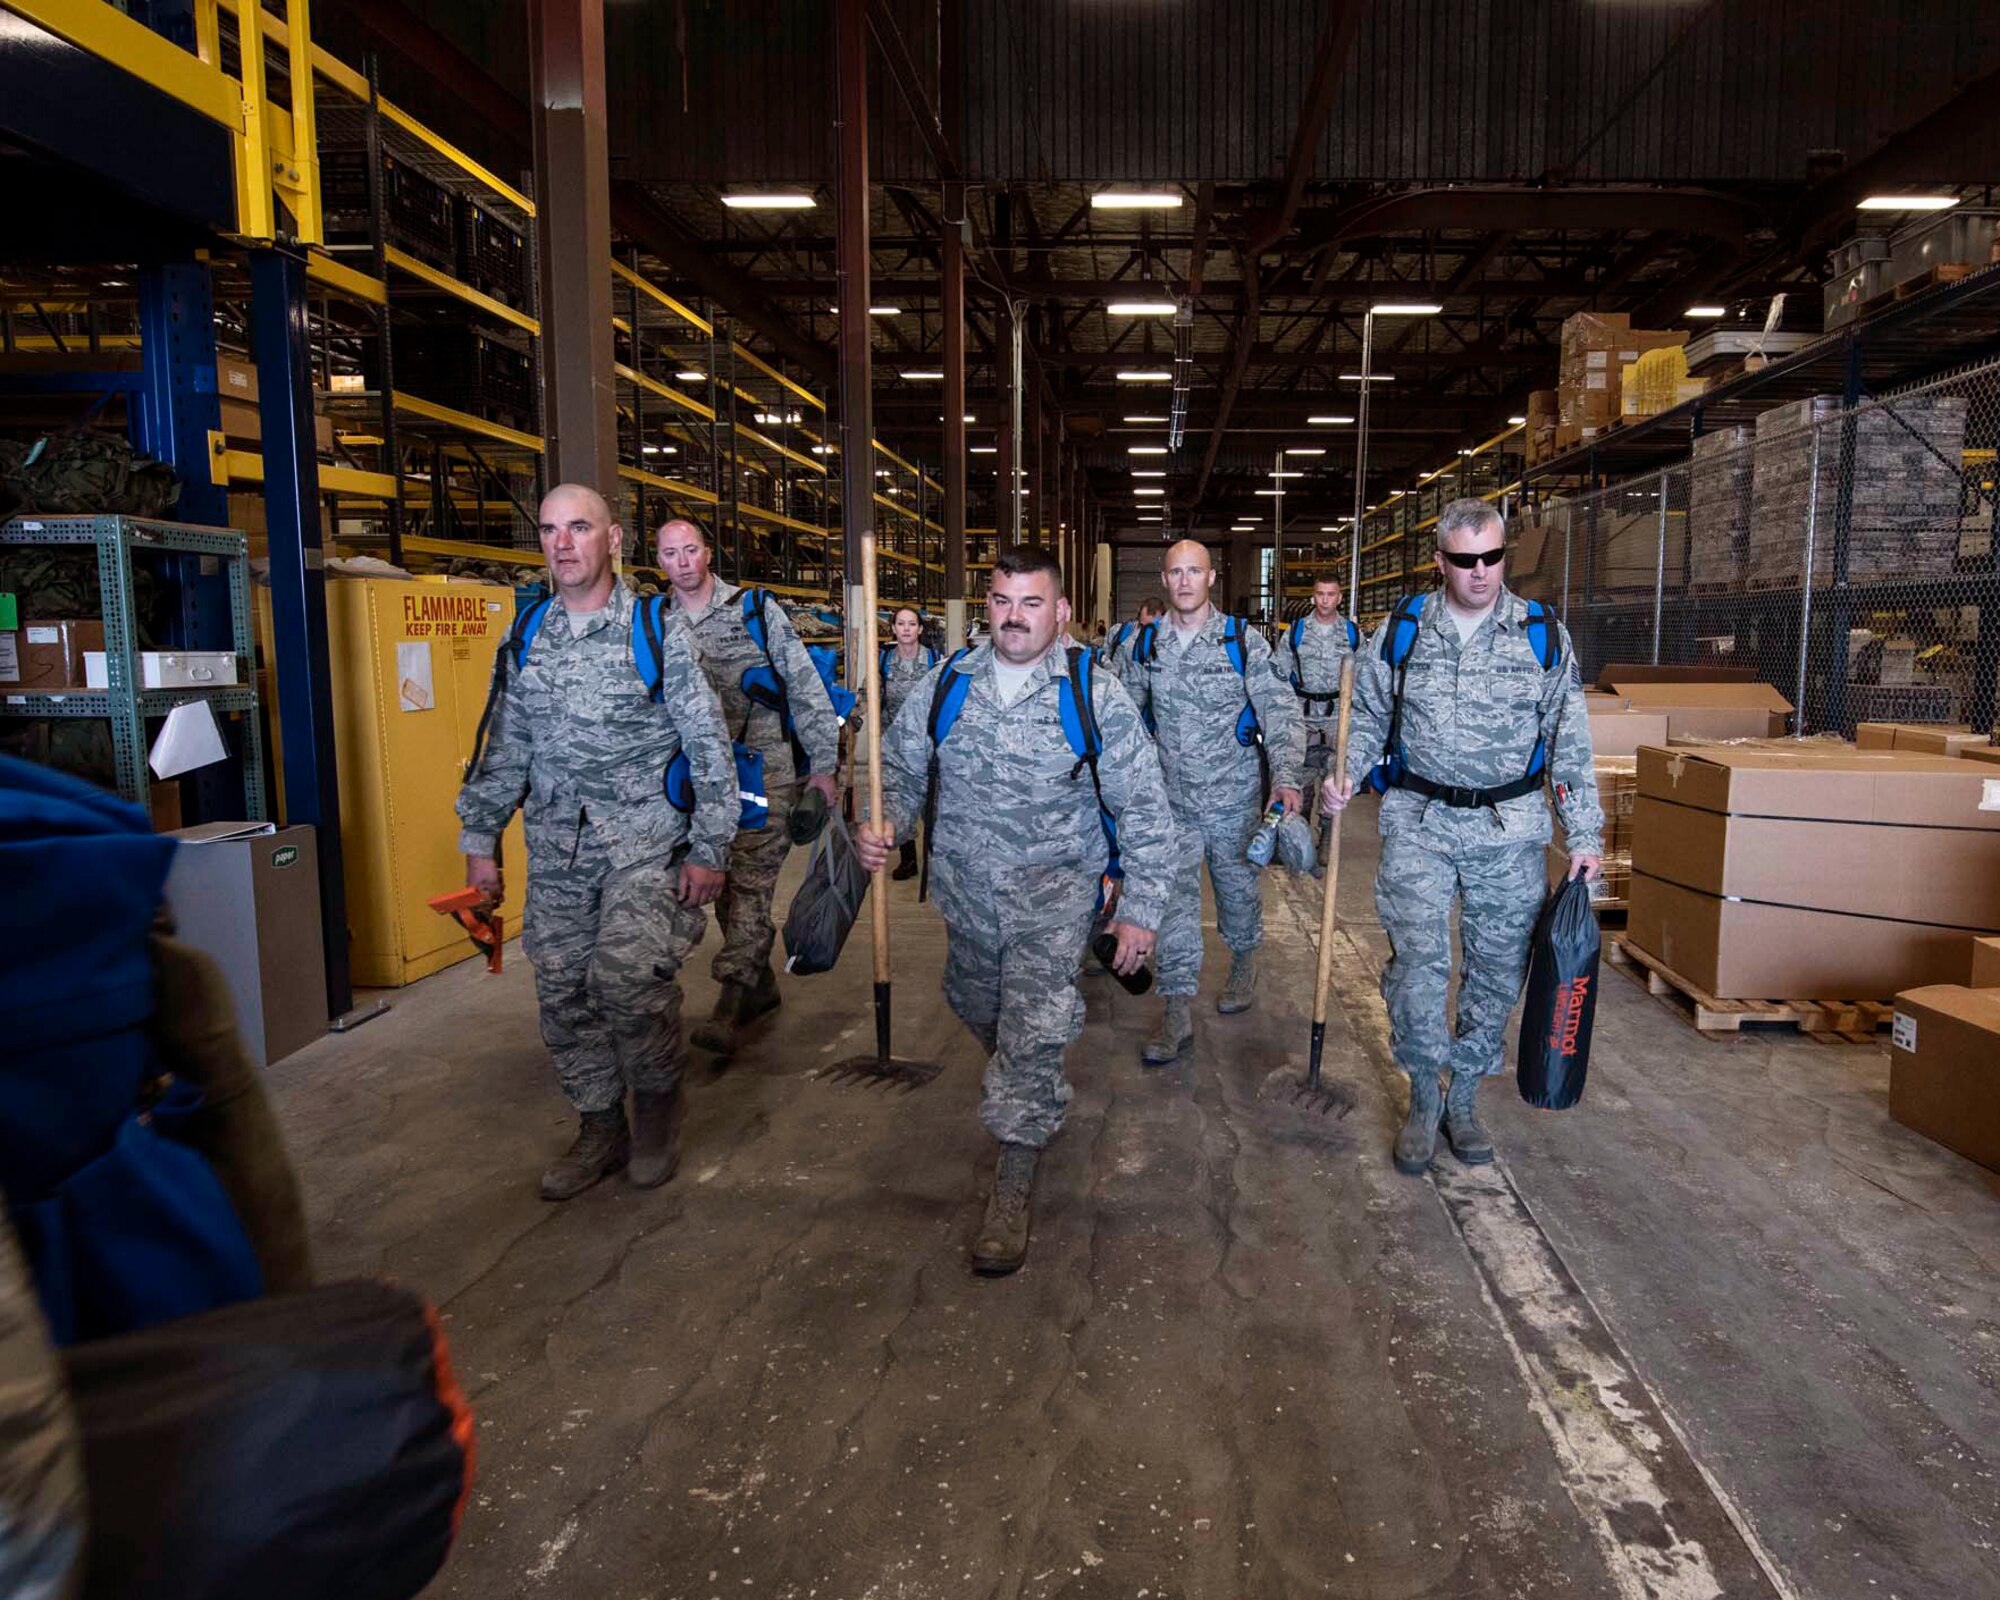 Airmen from the 141st Air Refueling Wing prepare to load emergency response and fire equipment at Fairchild Air Force Base, Wash. during a state mobilization in support of firefighting efforts in eastern Washington August 1, 2018. Gov. Jay Inslee activated Air and Army National Guard personnel to assist in firefighting efforts throughout the region. (U.S. Air National Guard photo by Staff Sgt. Rose M. Lust)